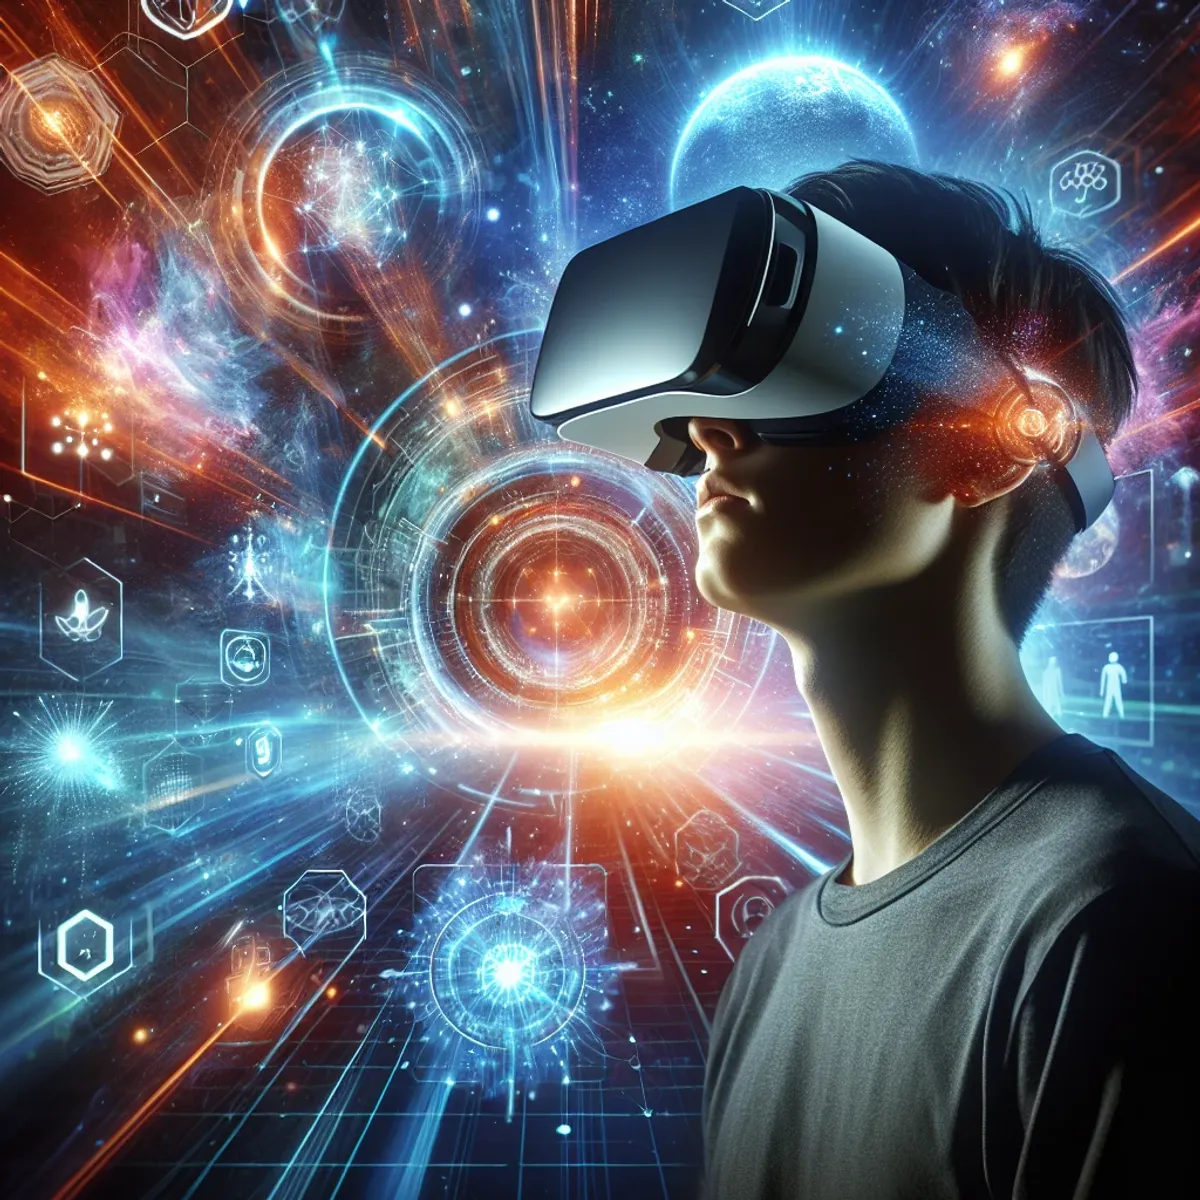 A person wearing a VR headset and immersed in a colorful, futuristic virtual reality experience.